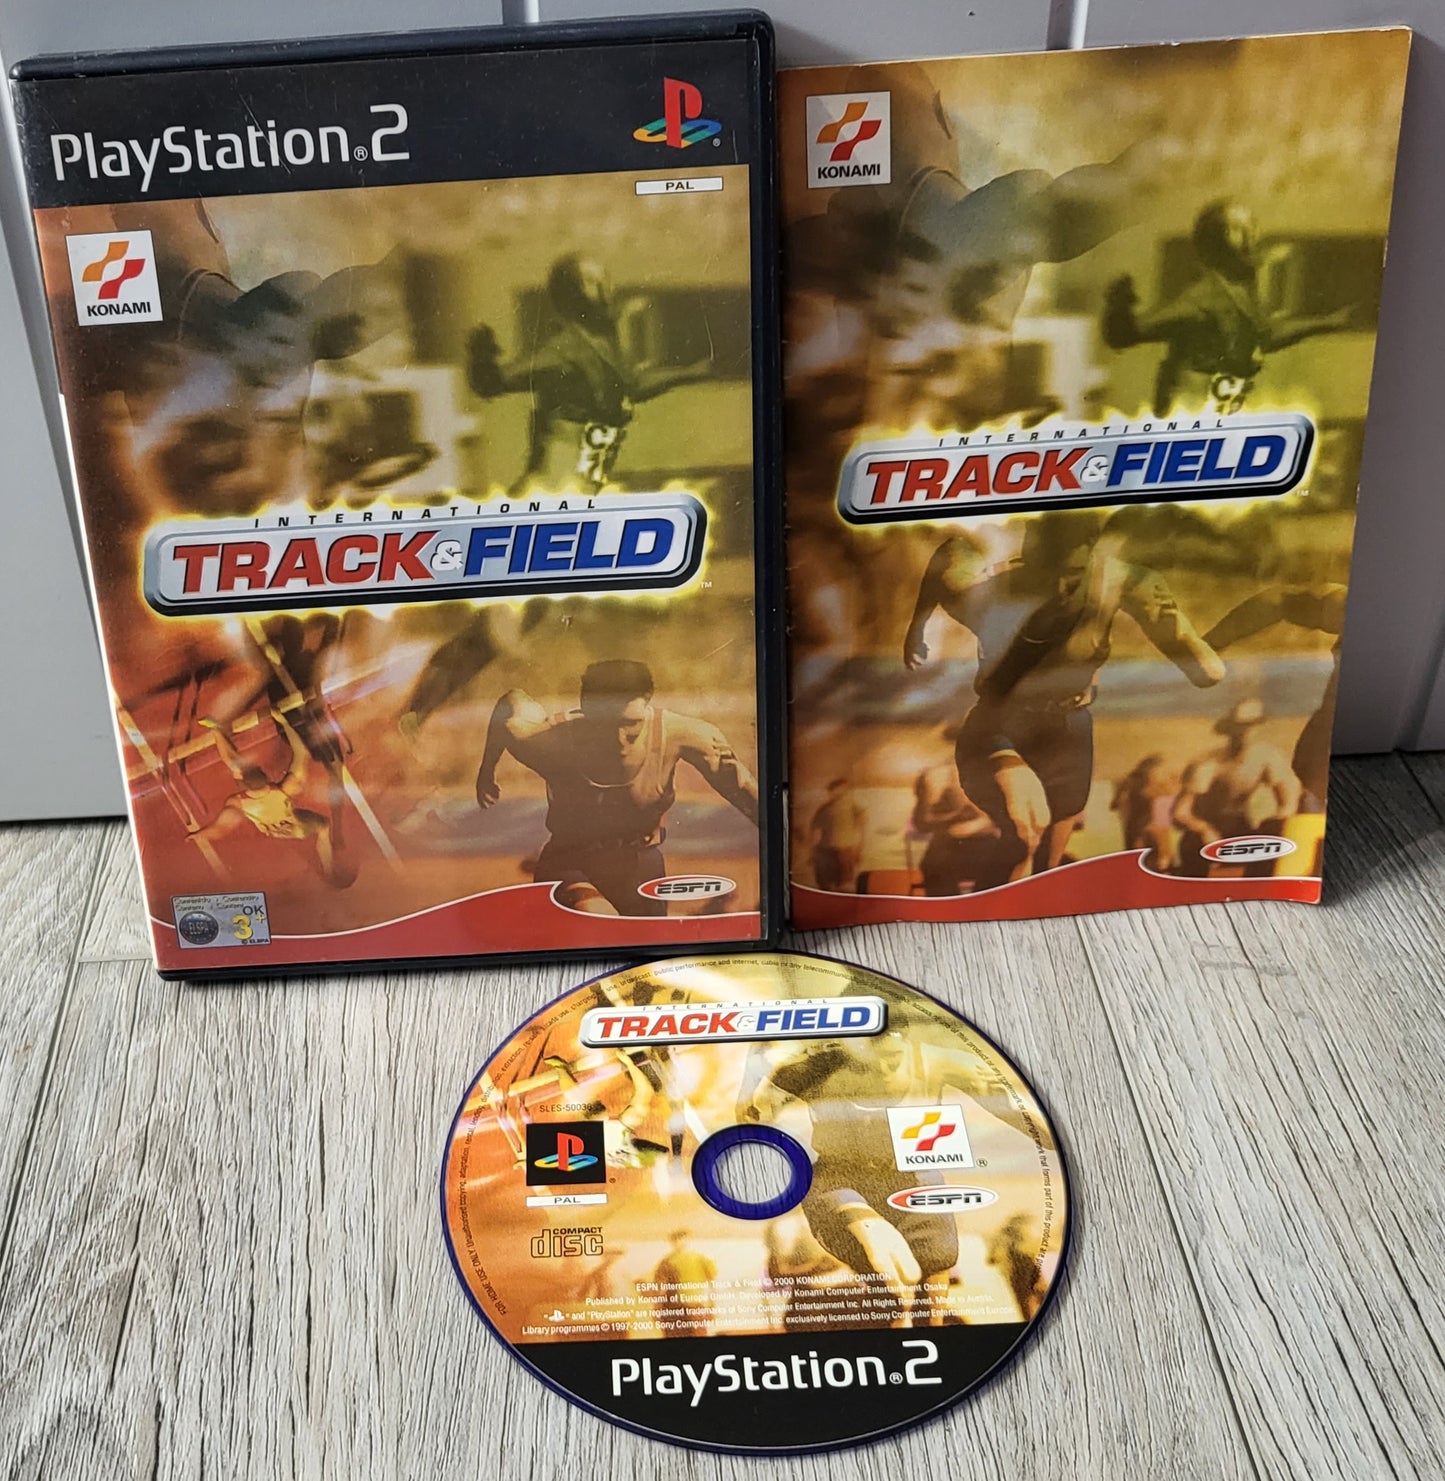 International Track & Field Sony Playstation 2 (PS2) Game